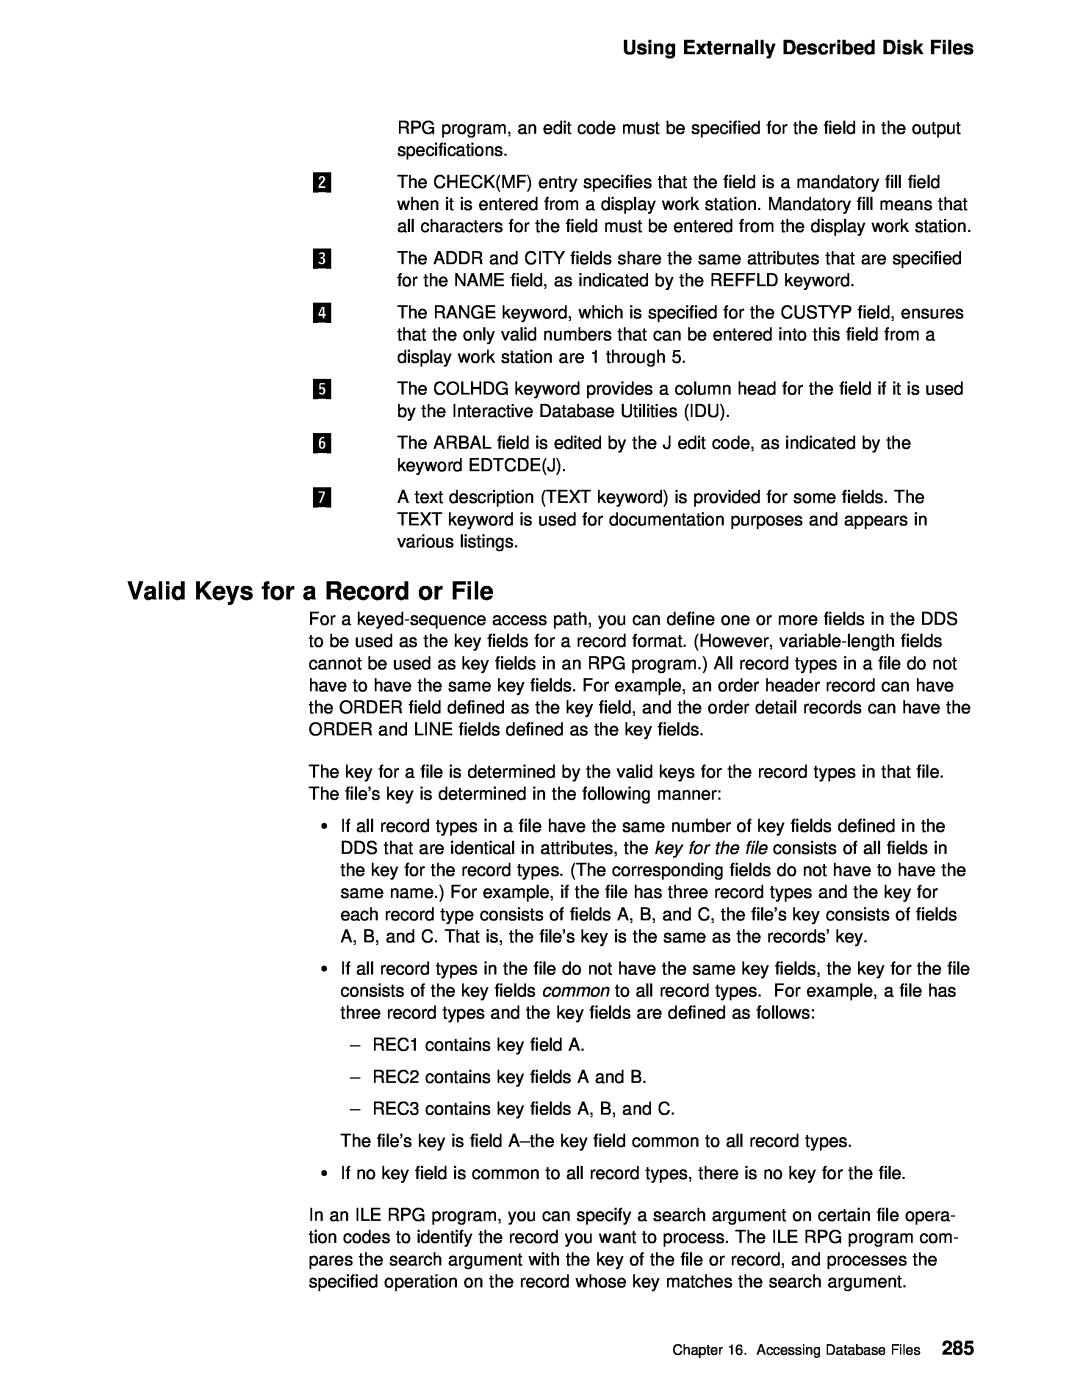 IBM AS/400 manual Valid Keys for a Record, File, Disk 